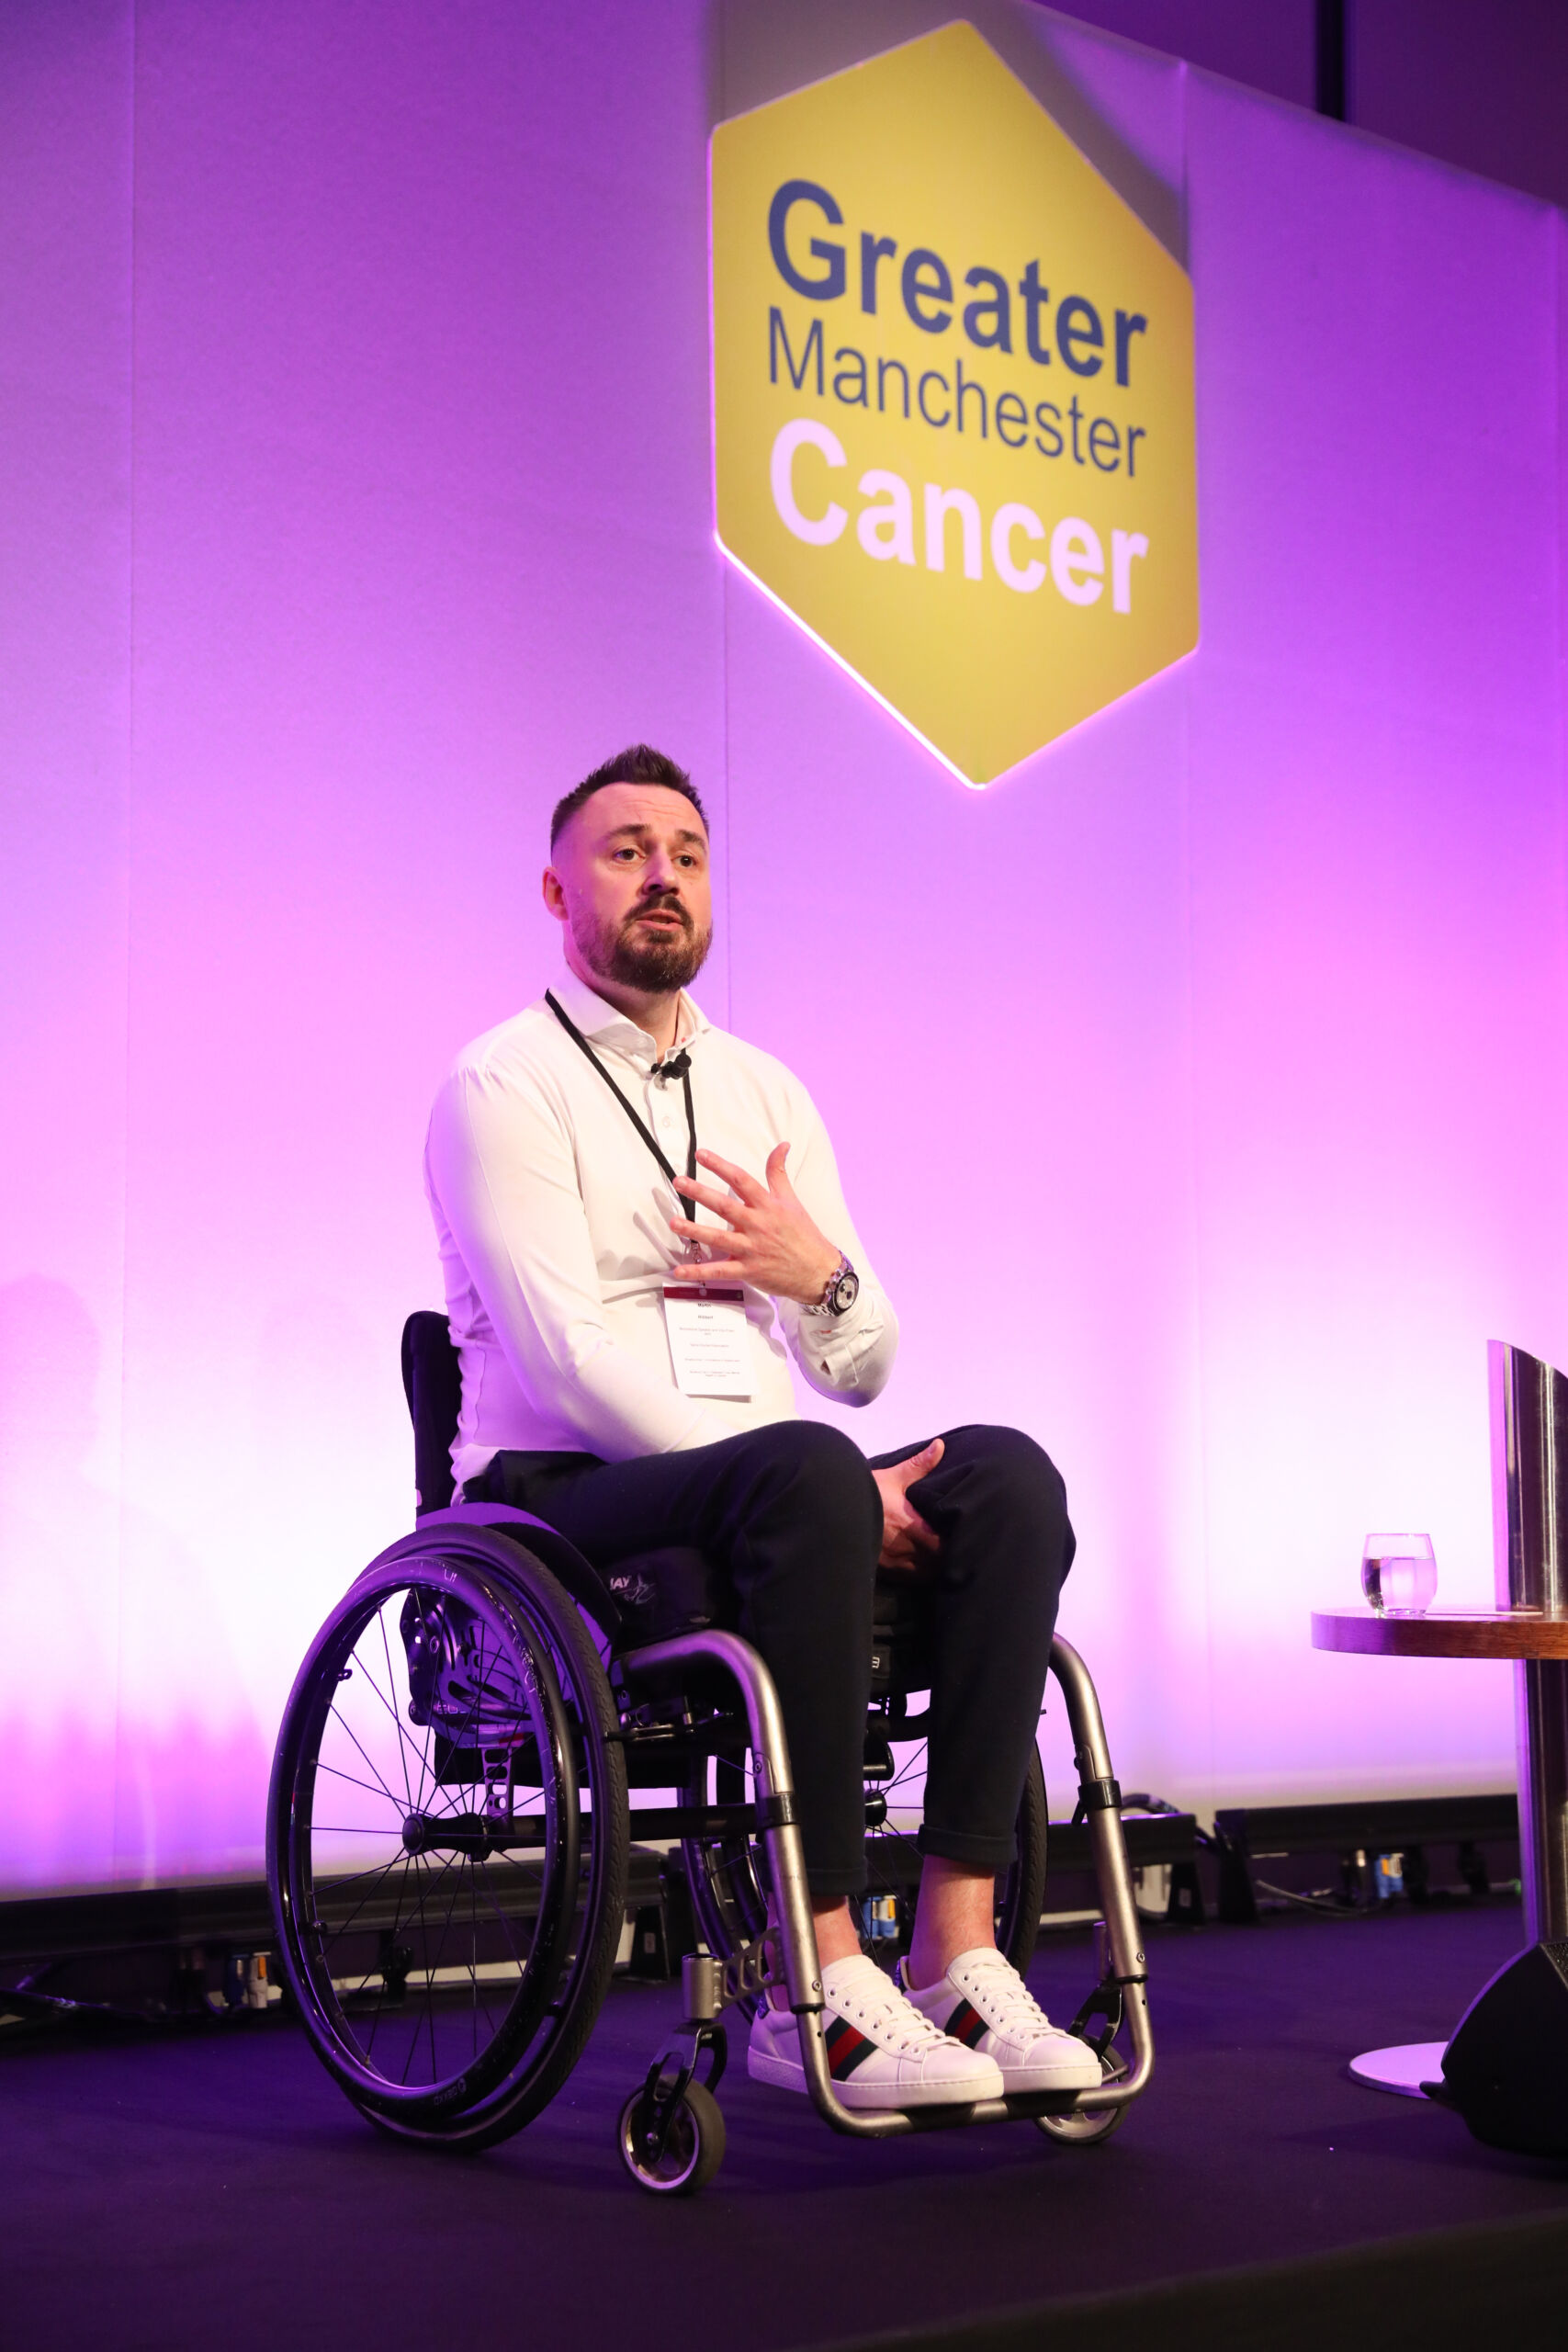 A white man in a white shirt with dark hair and beards sitting on stage in a wheel chair at the Greater Manchester Cancer Conference with the green Greater Manchester Cancer hexagon logo in the background